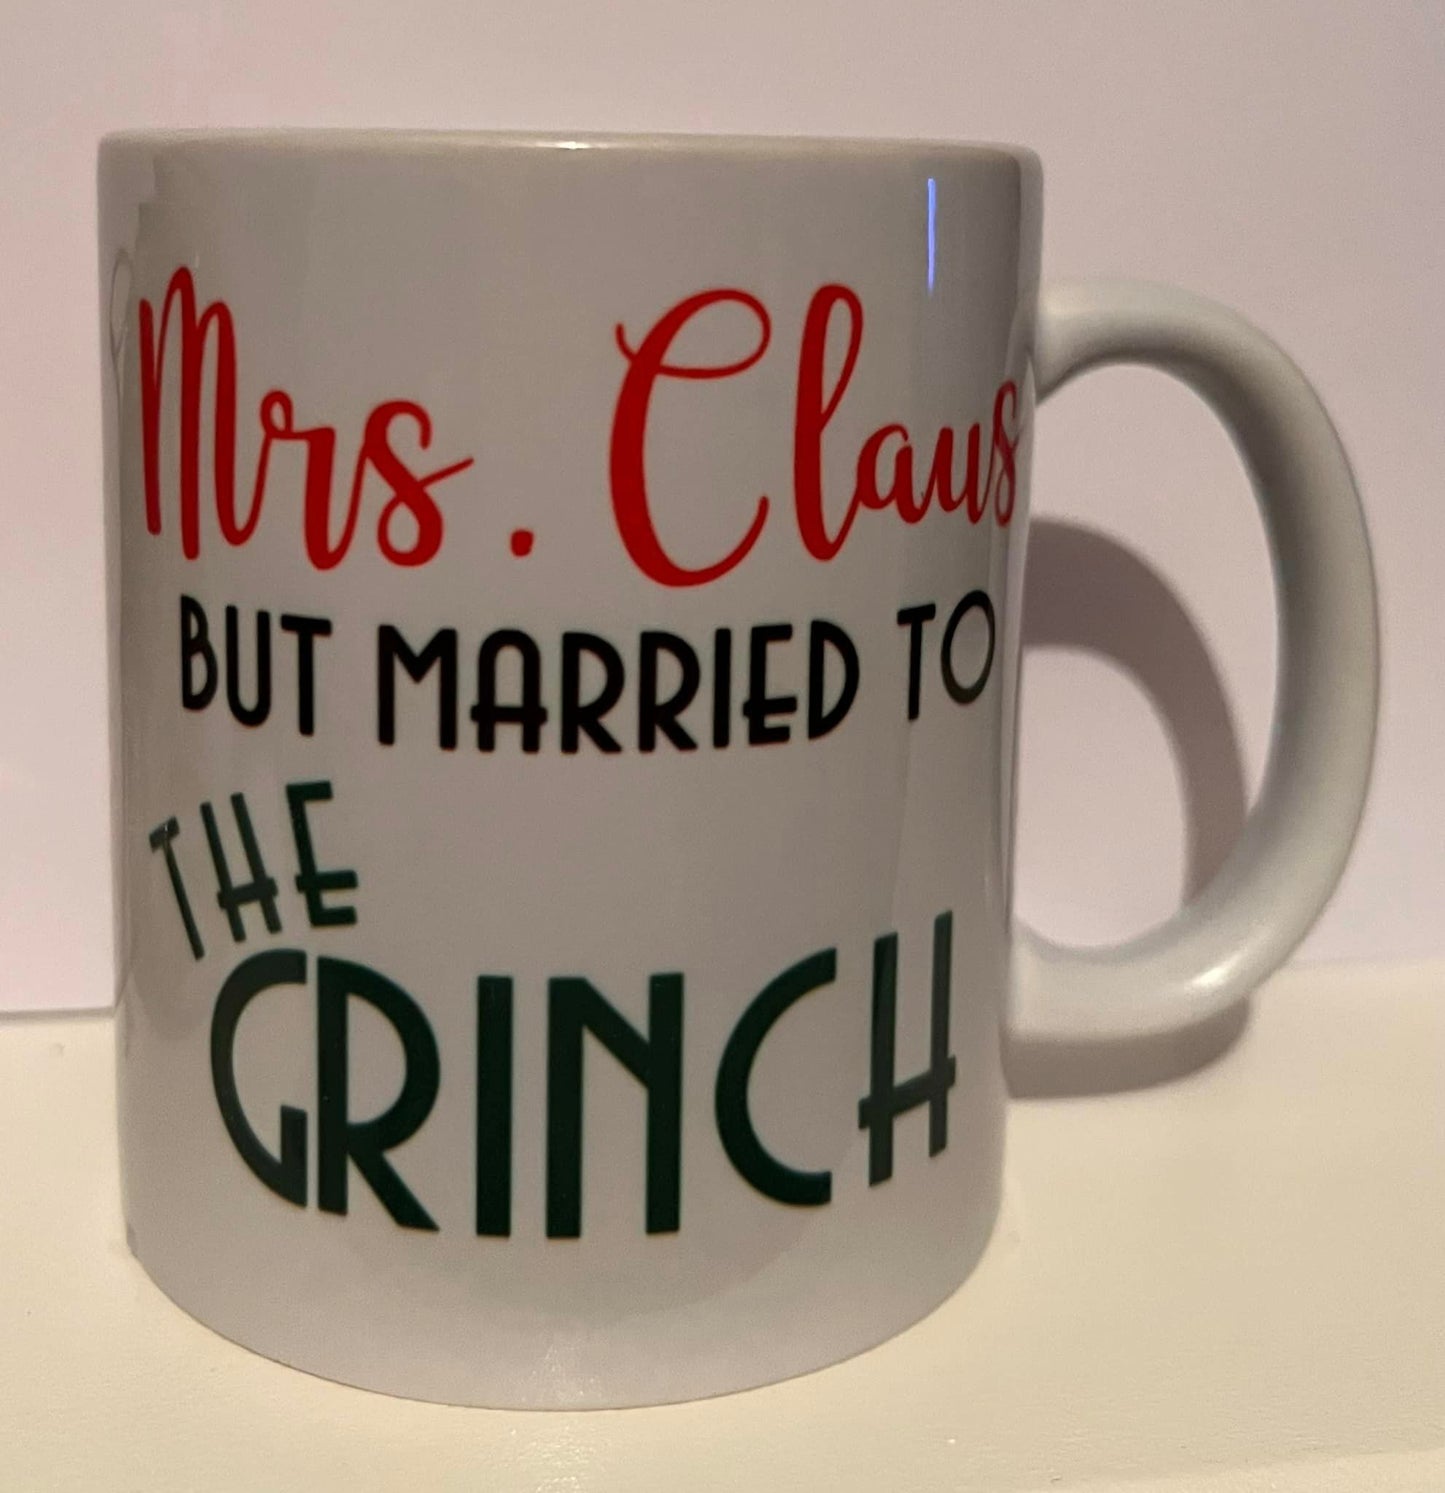 MRS CLAUS BUT MARRIED TO THE GRINCH 11 OZ COFFEE MUG